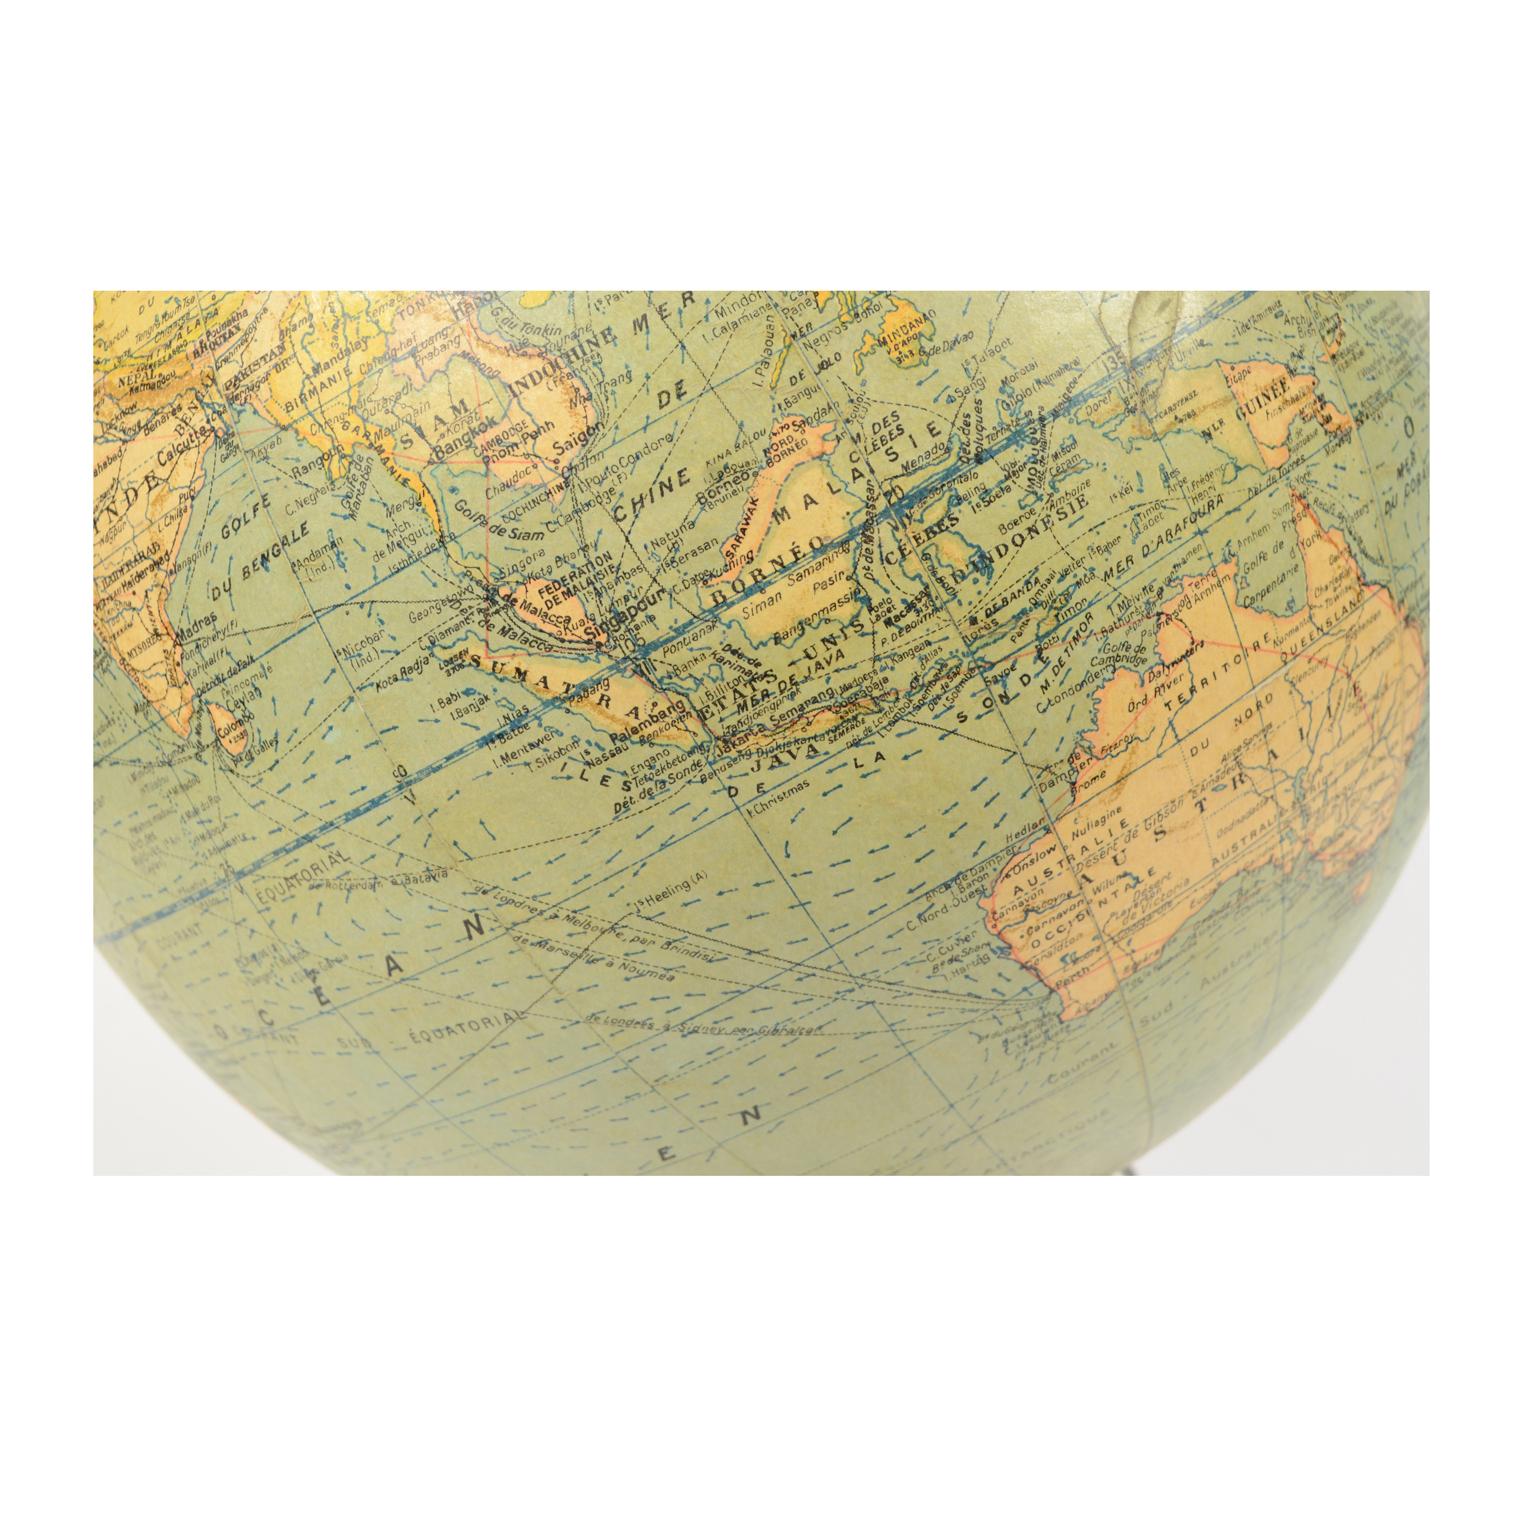 Antique Terrestrial Globe Published in 1940s by Girard Barrère et Thomas, Paris For Sale 1